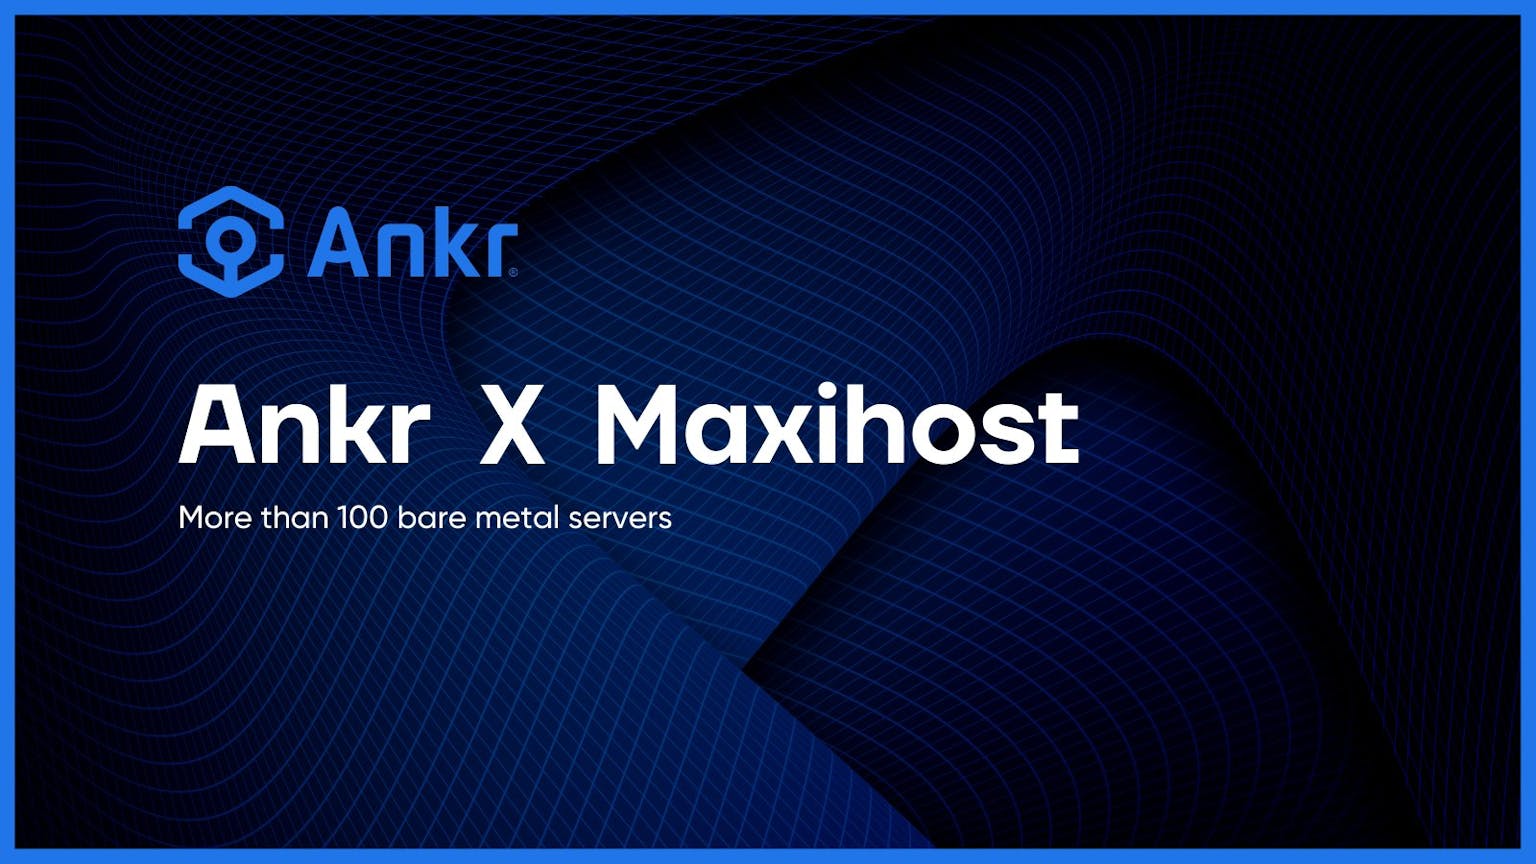 Ankr and Maxihost